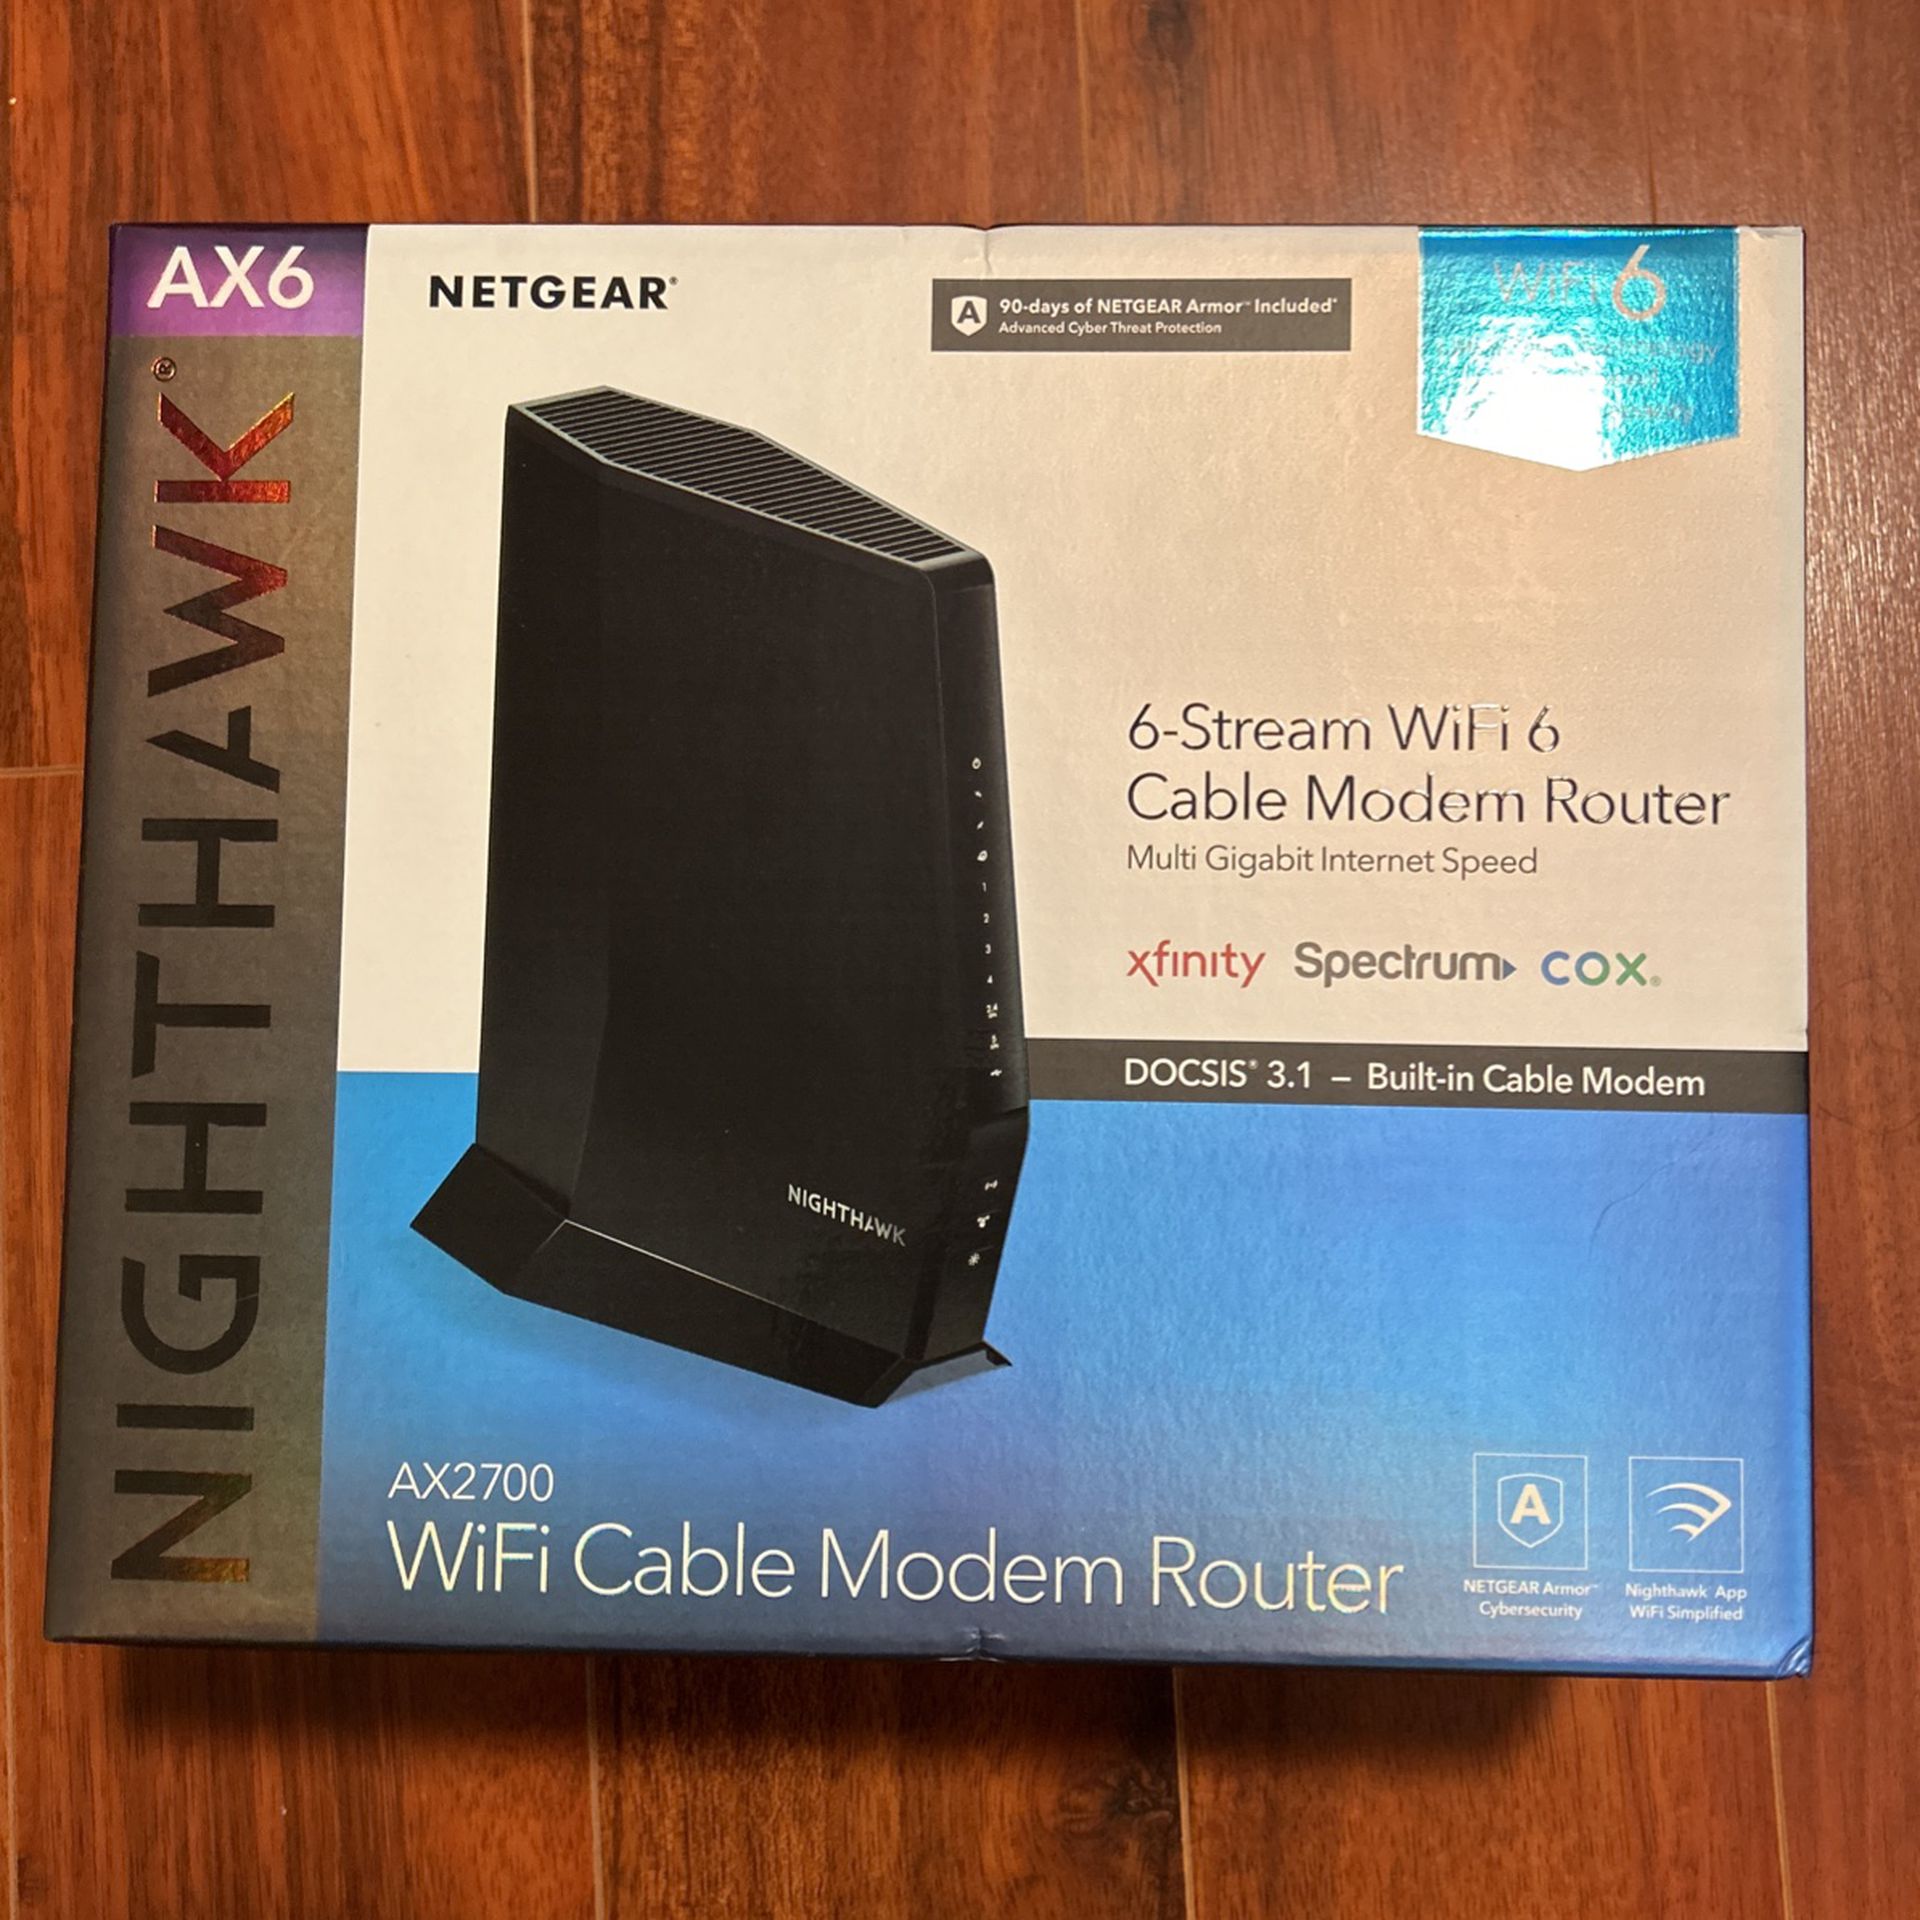 Wi-Fi Cable modem router